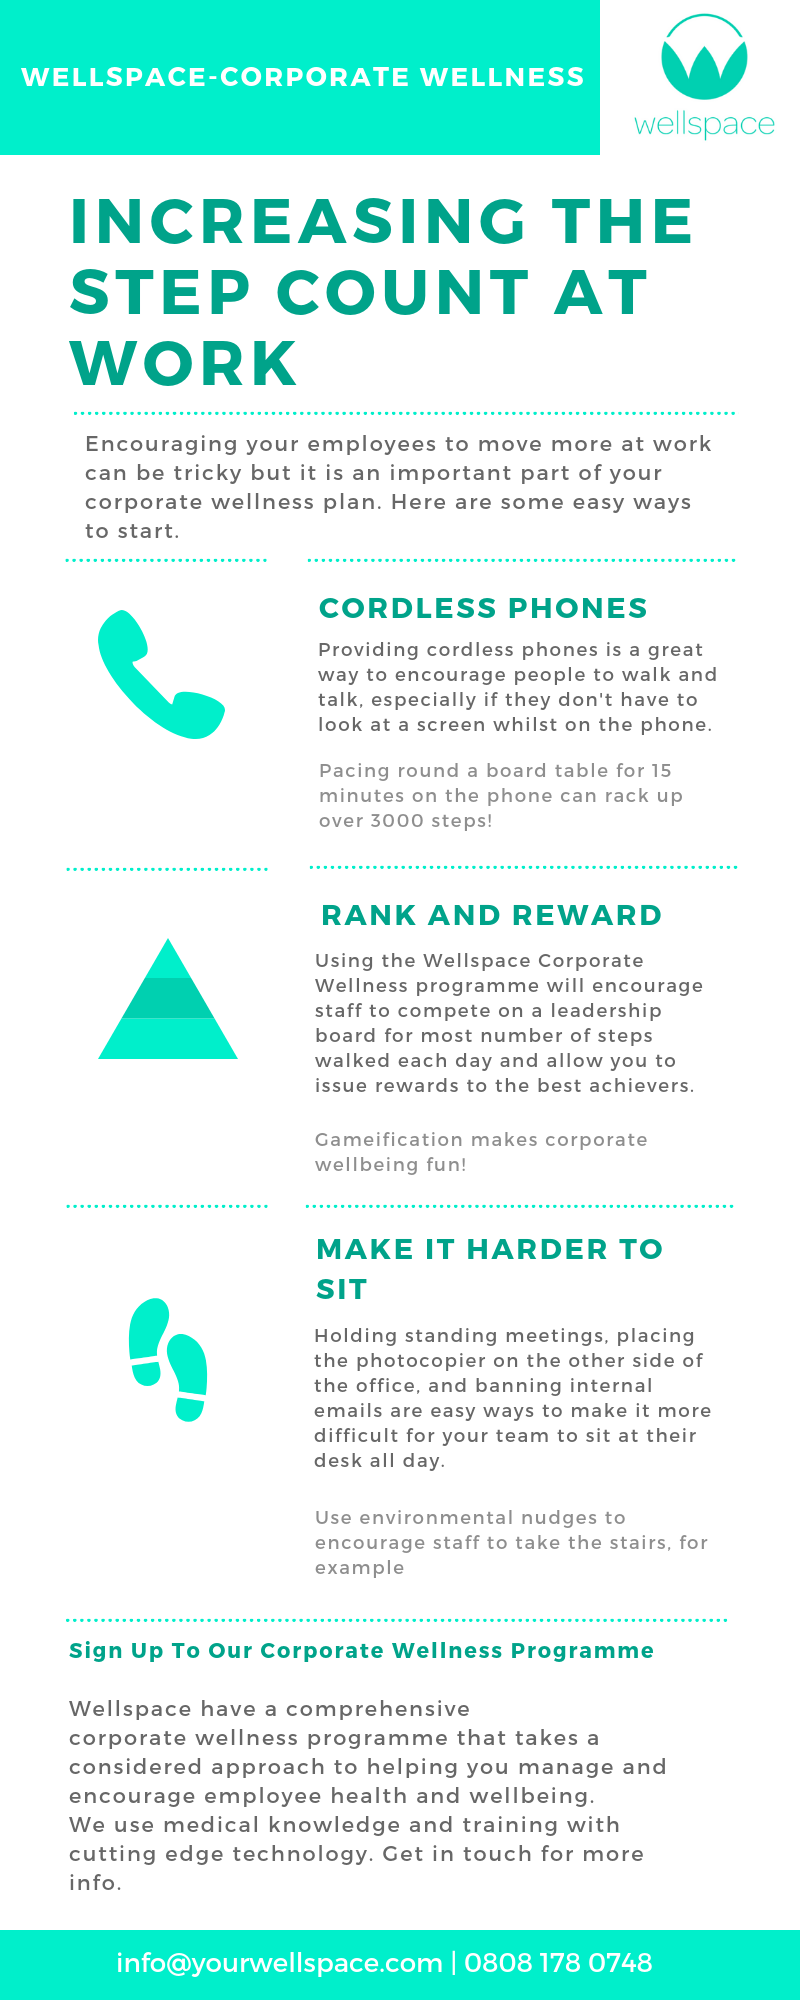 Infographic from wellspace on corporate wellness and increasing the step count at work